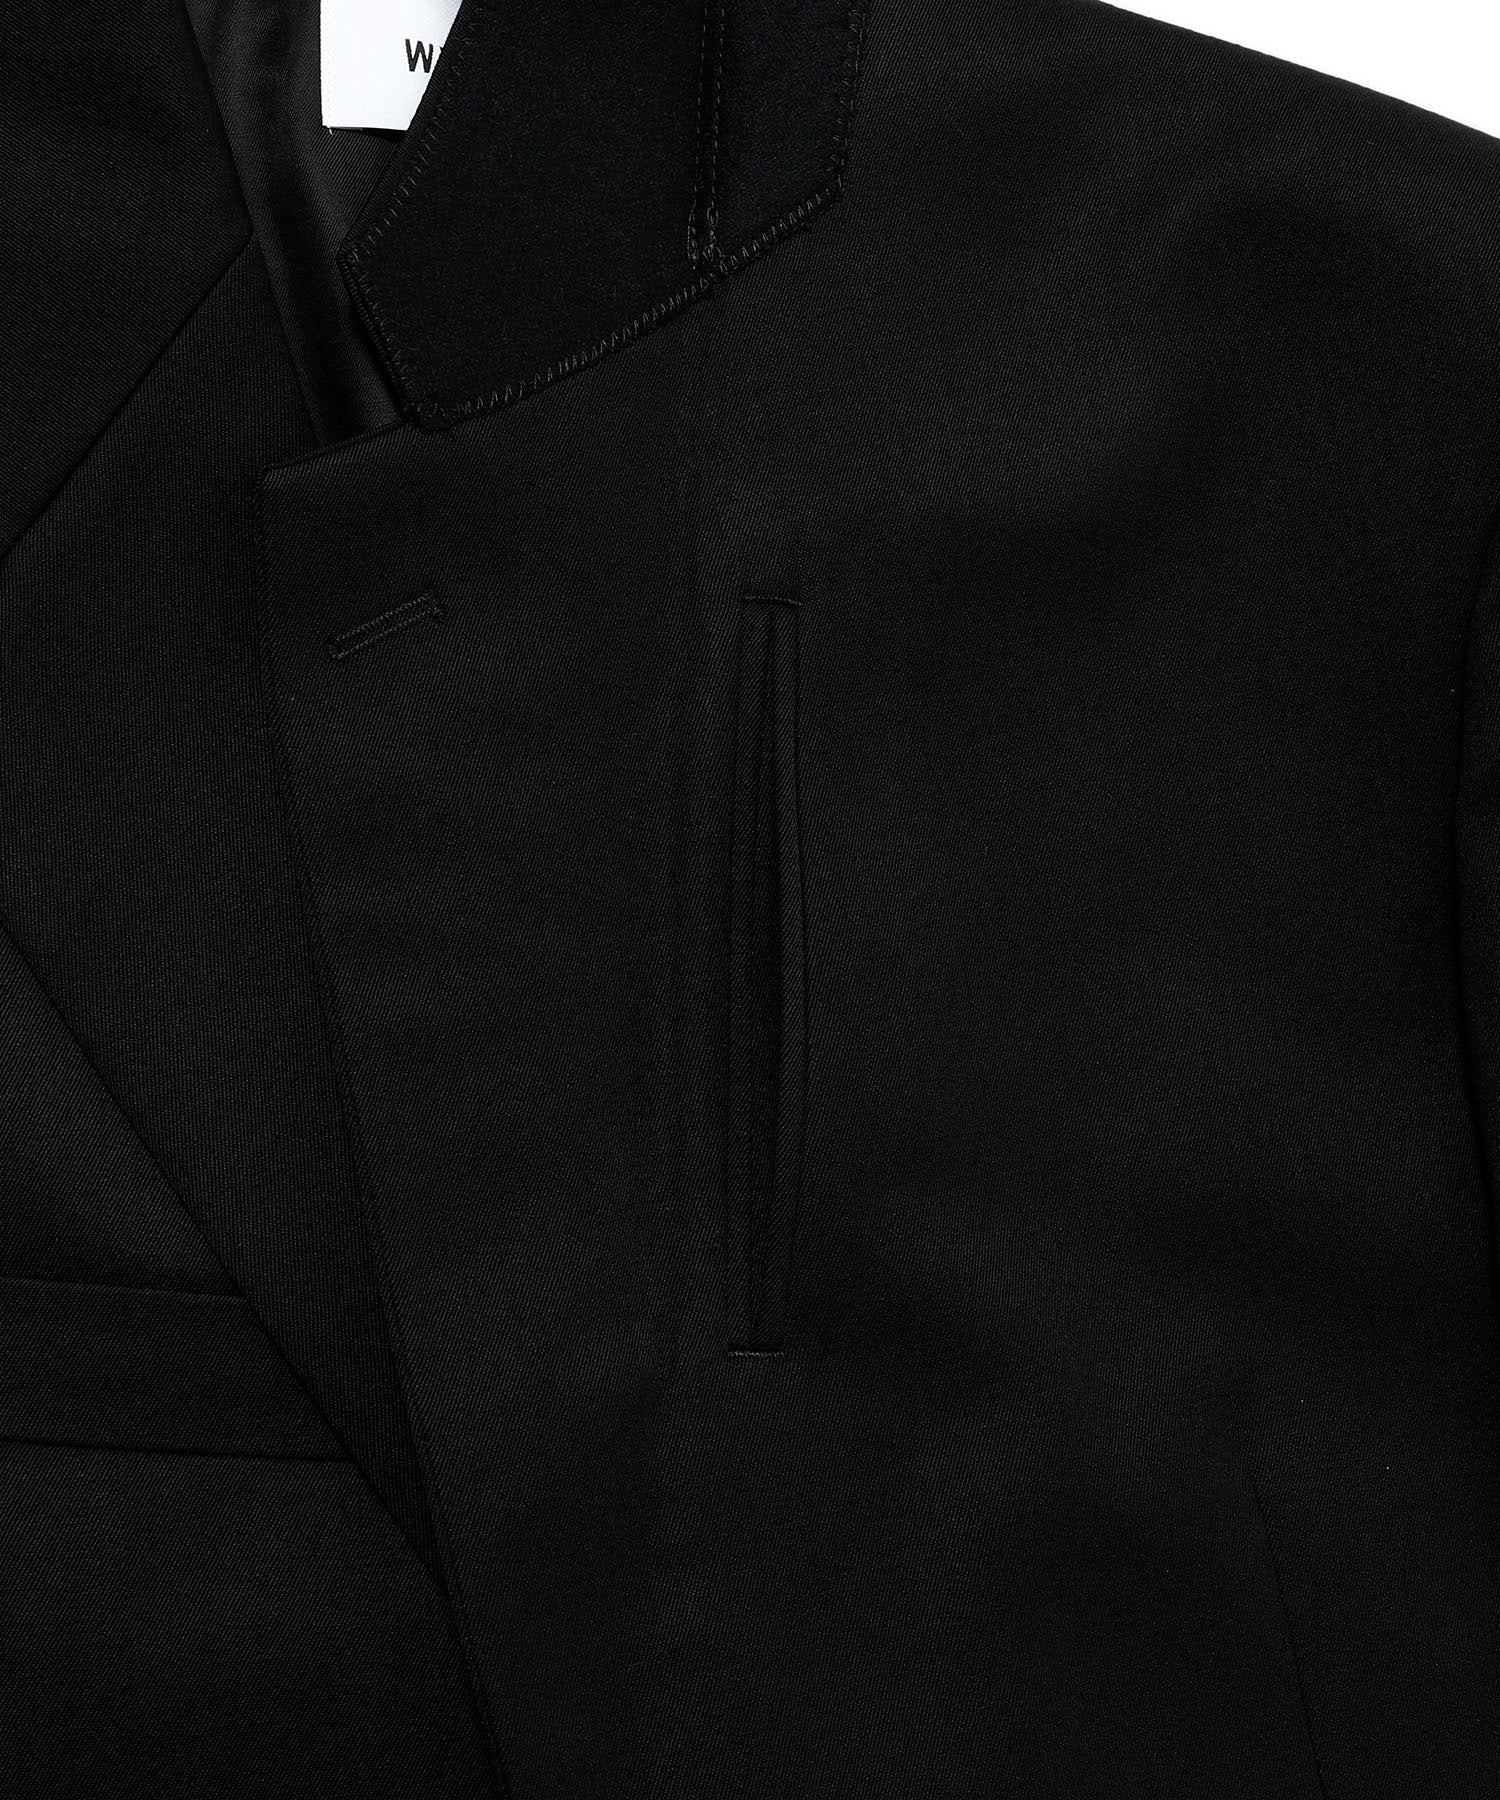 Tailored Square Jacket